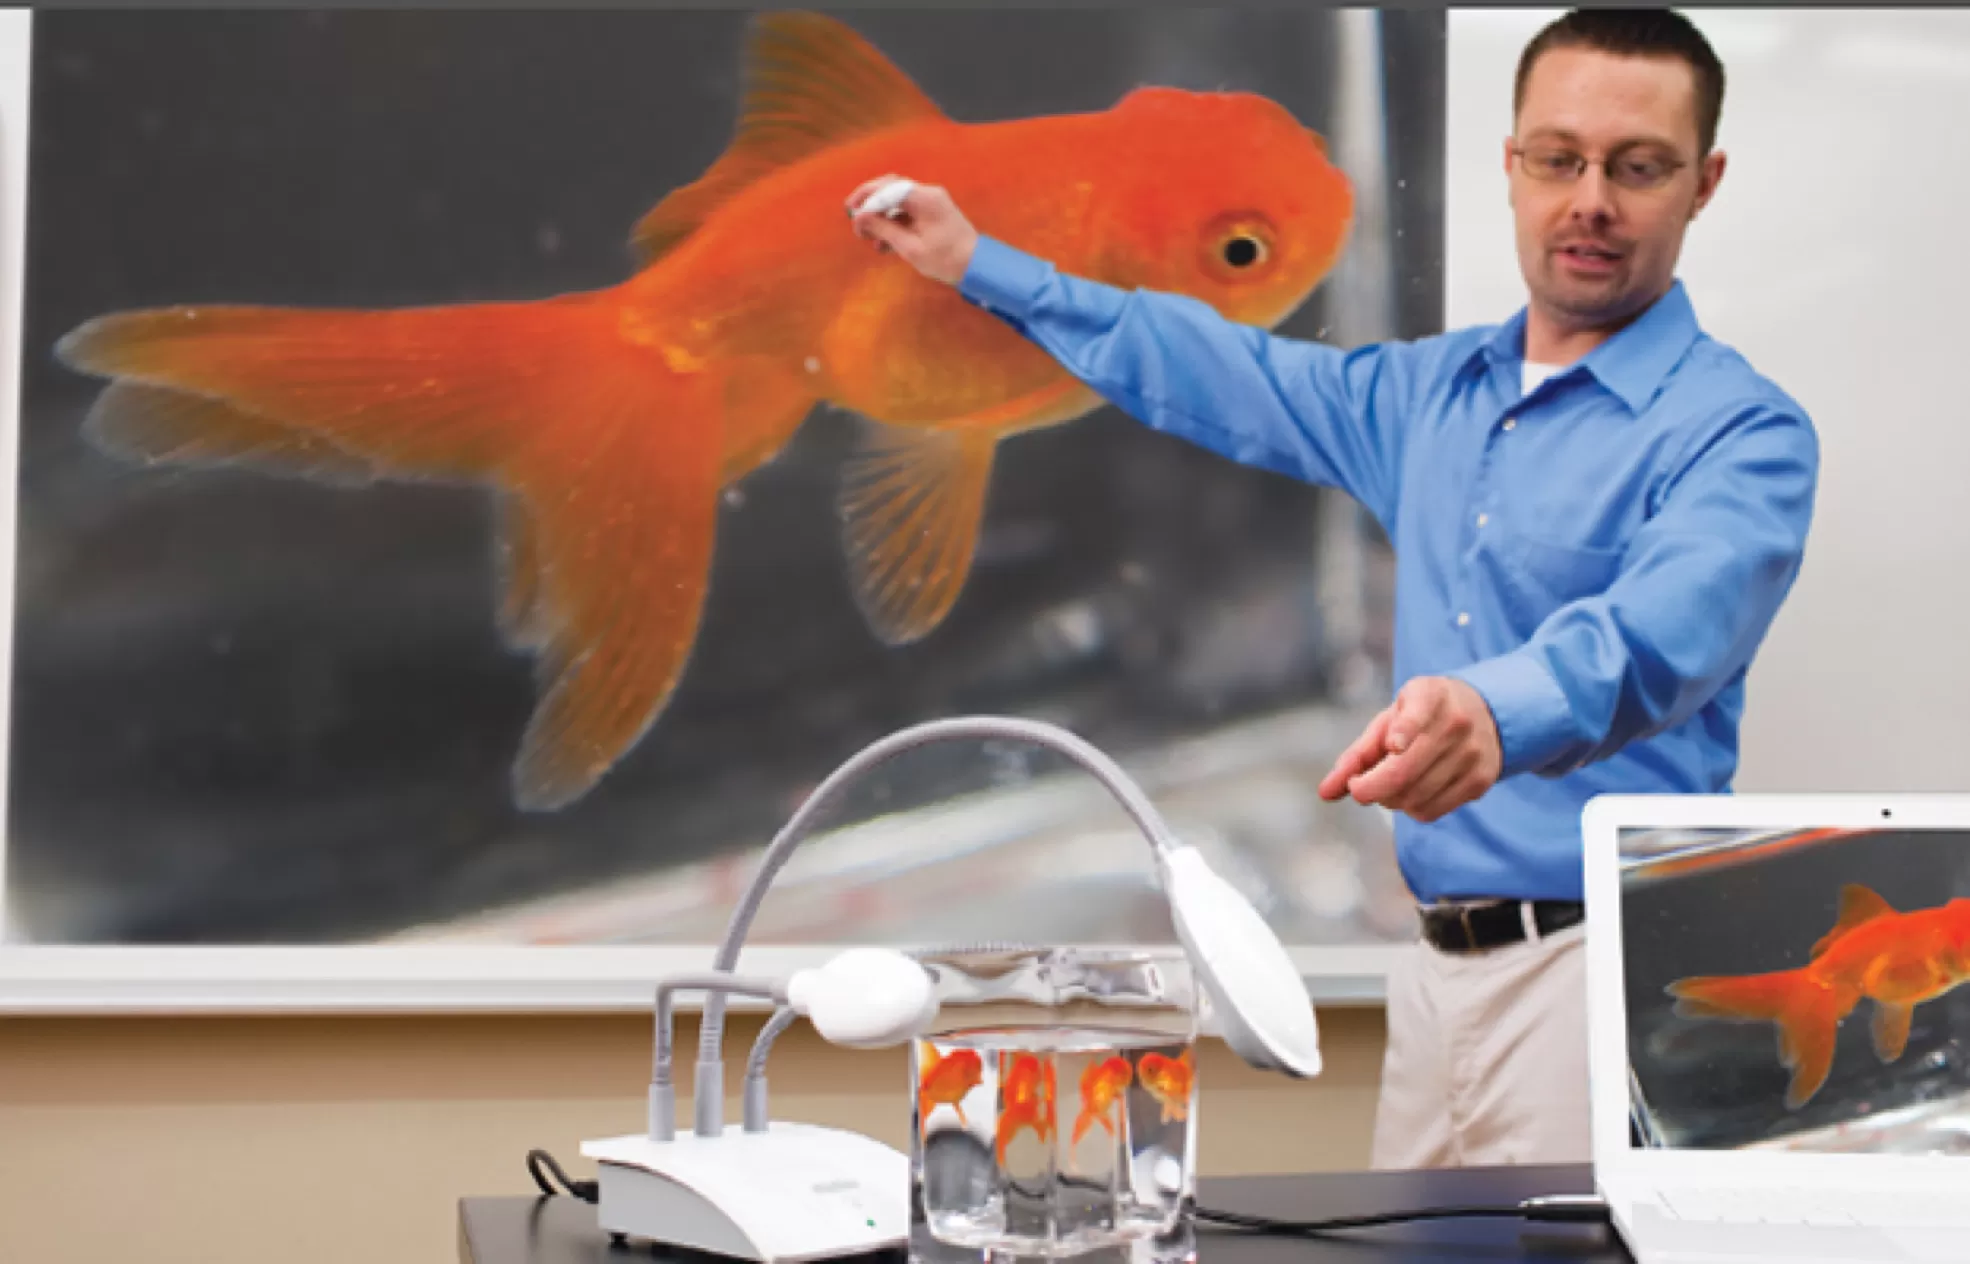 MimioView 350U Document Camera being used to film a goldfish in a jar and project onto a MimioTeach whiteboard